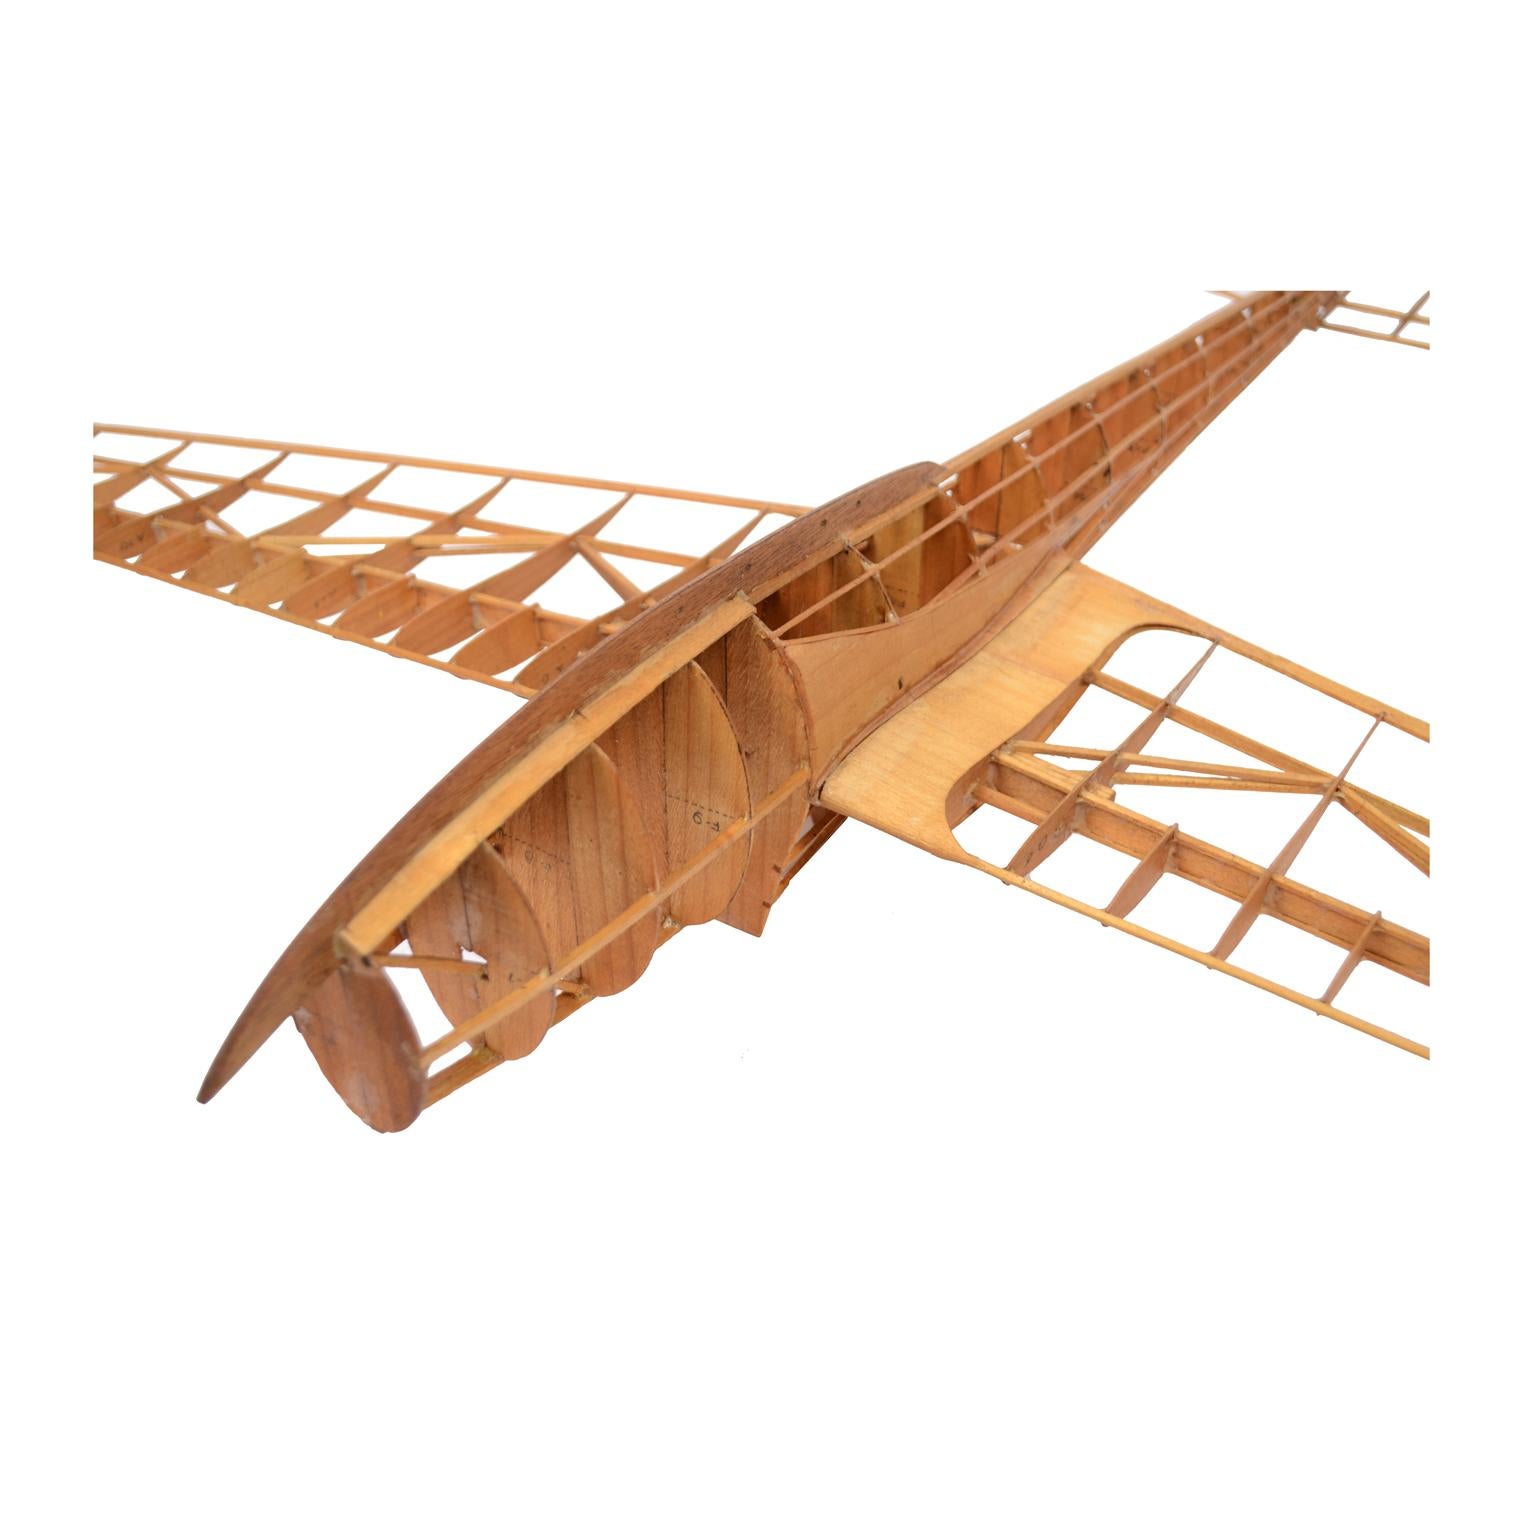 Scale Model of the Structure of a Passenger Airplane 5